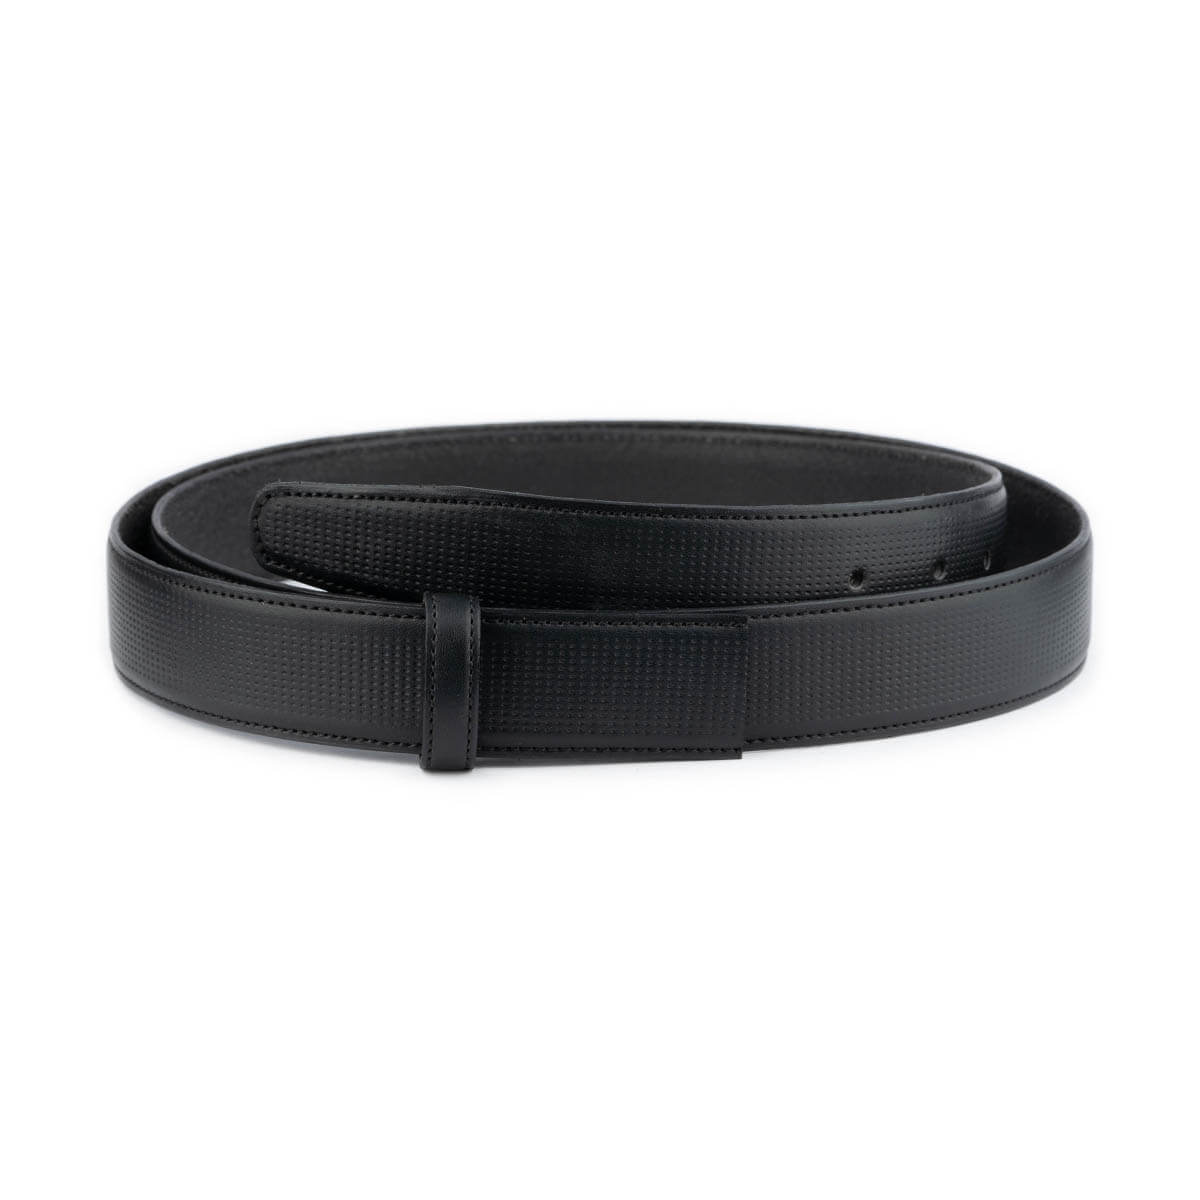 Buy Black Perforated Golf Leather Belt Strap Replacement ...